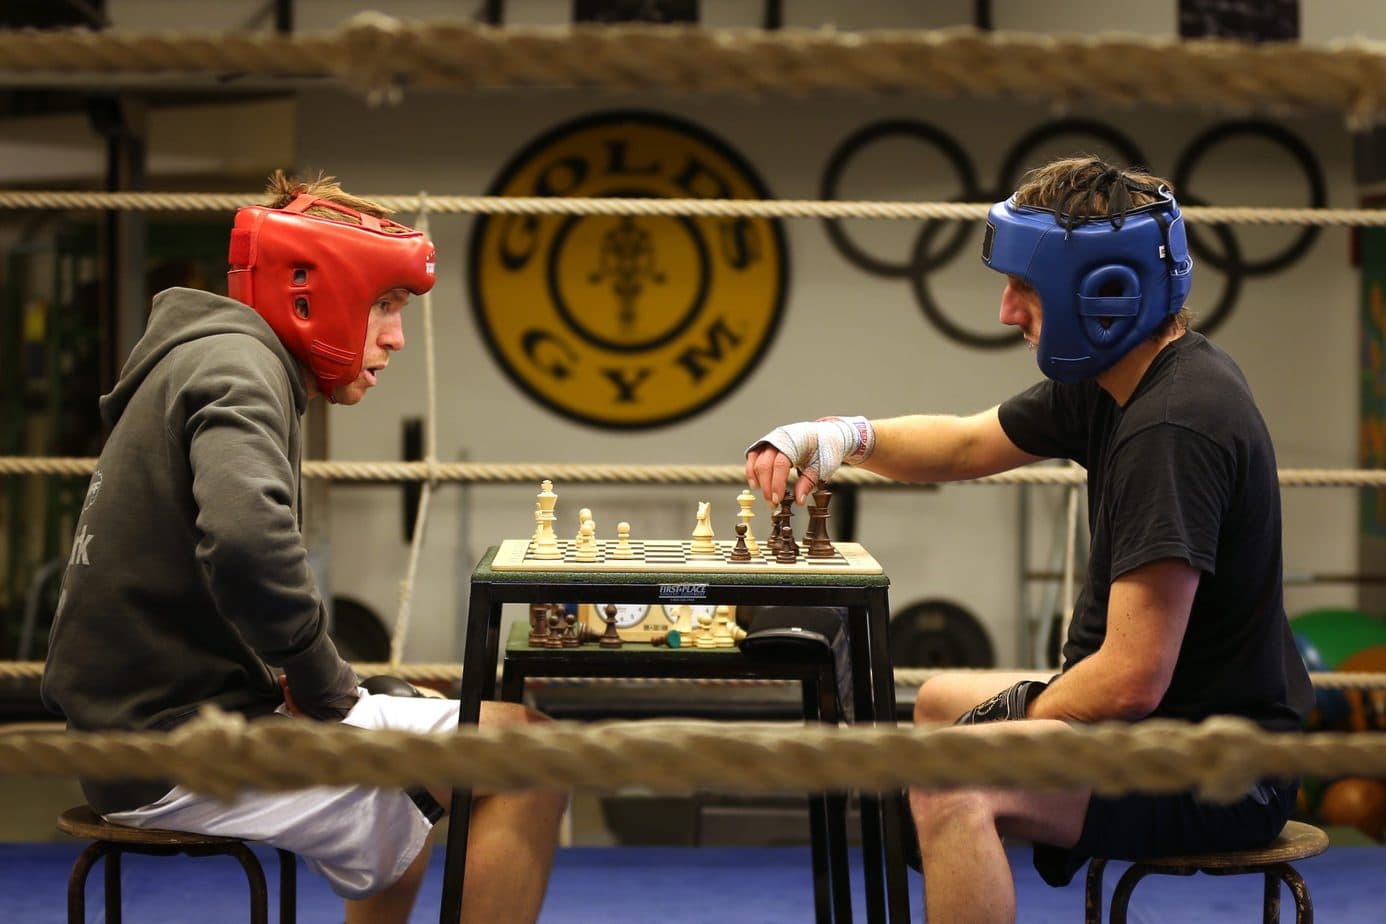 CHESSBOXING: A sport combining strength and reflexion - Voice of London